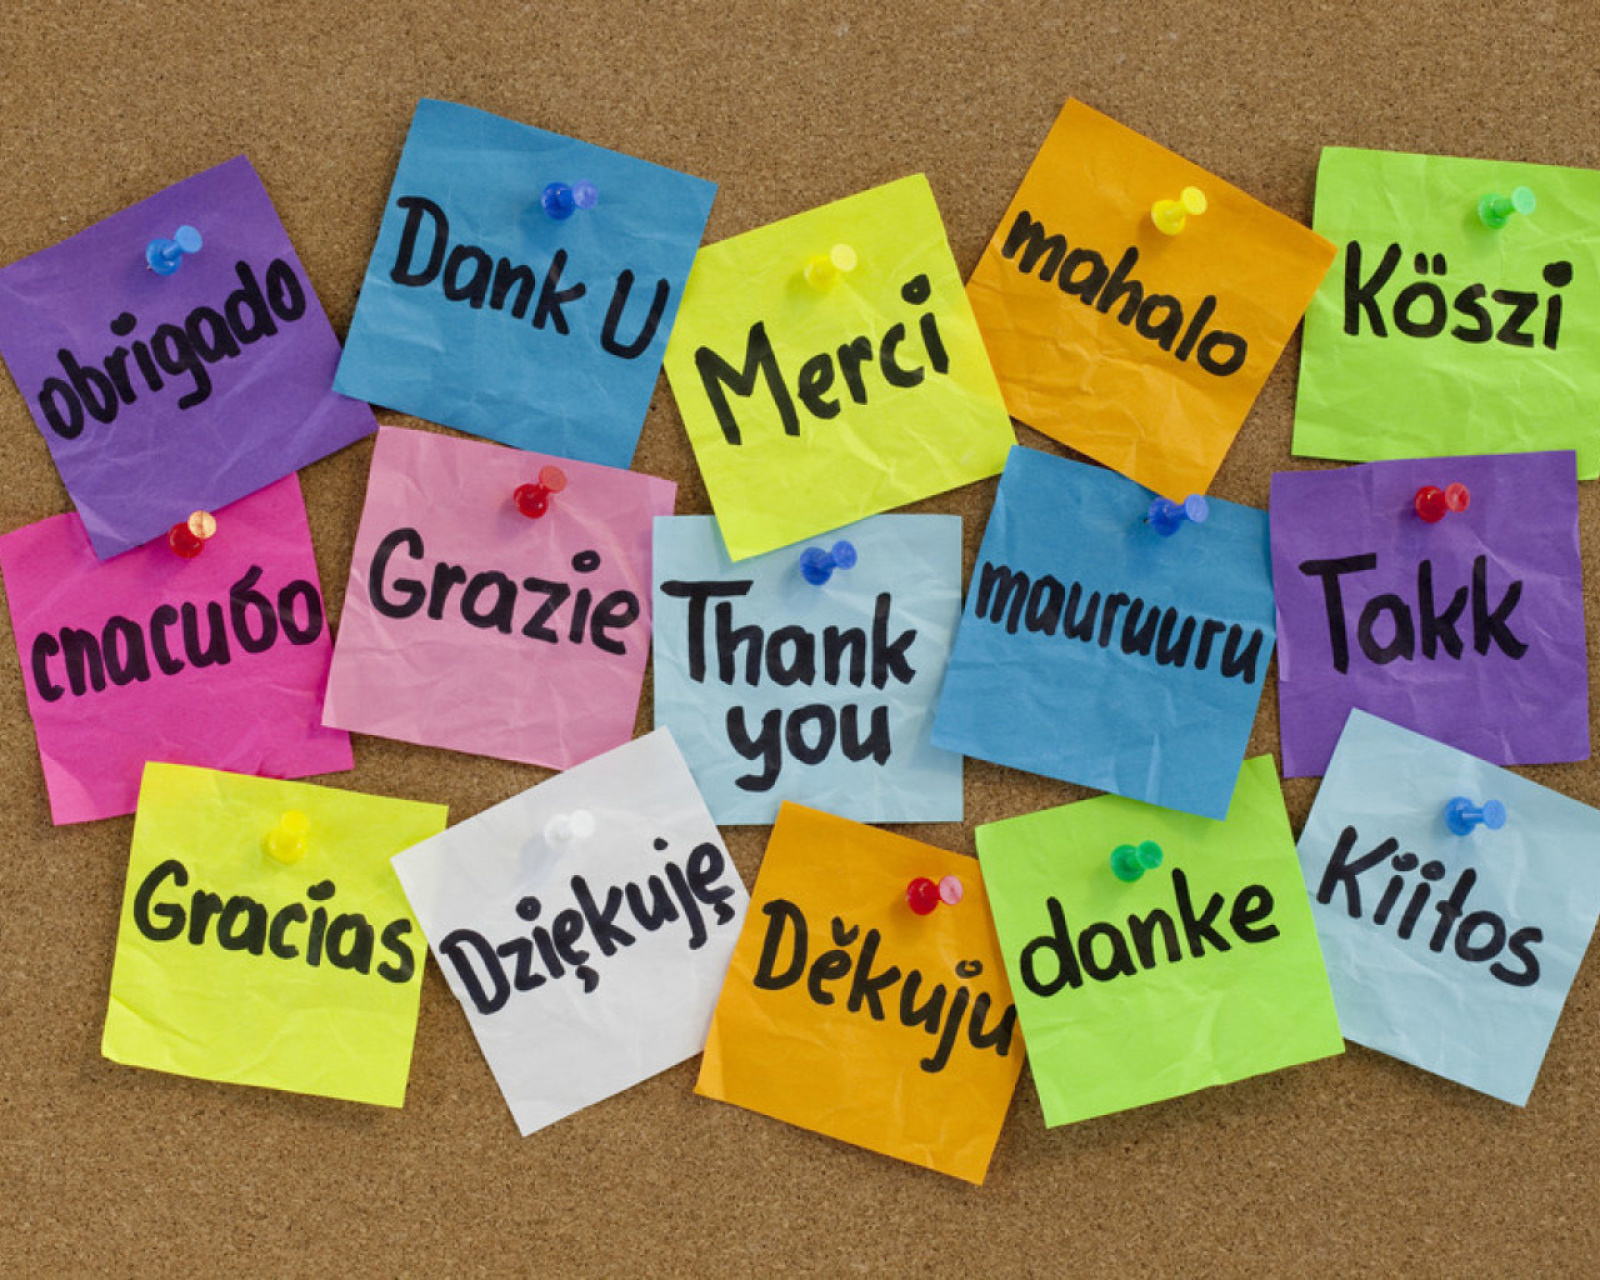 How To Say Thank You in Different Languages screenshot #1 1600x1280